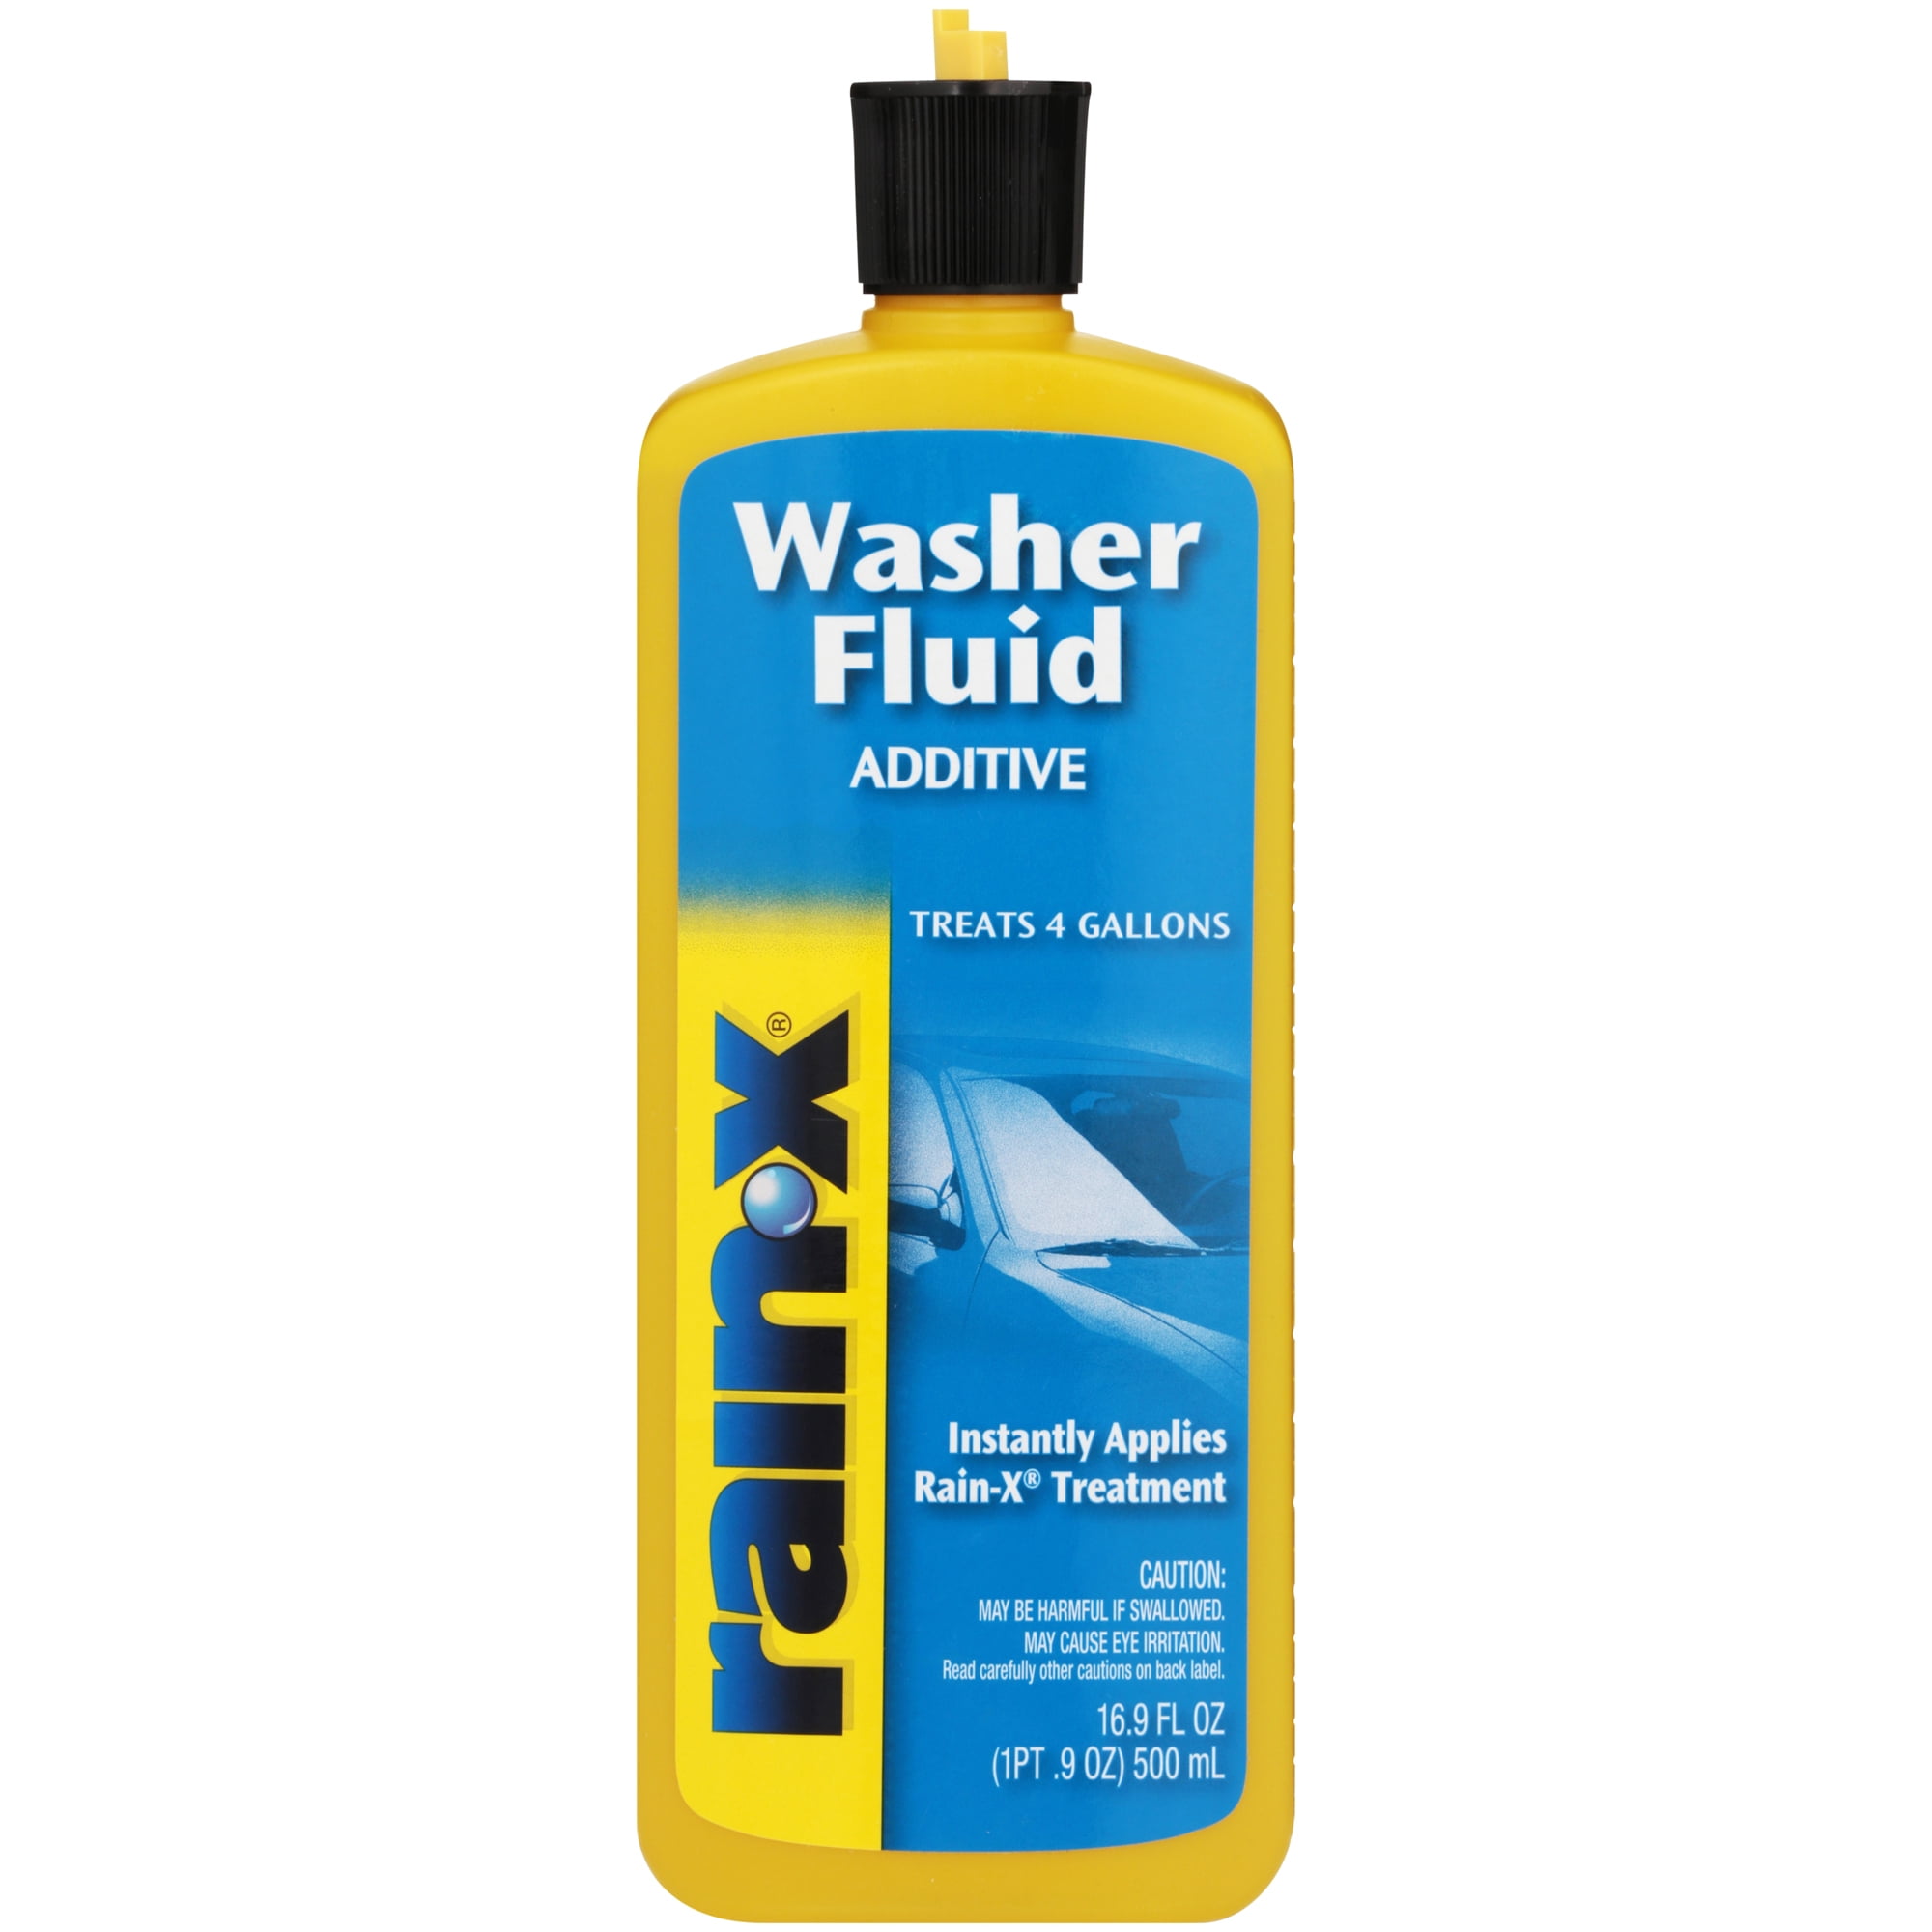 Costs for 2 chemicals boost wiper-fluid prices